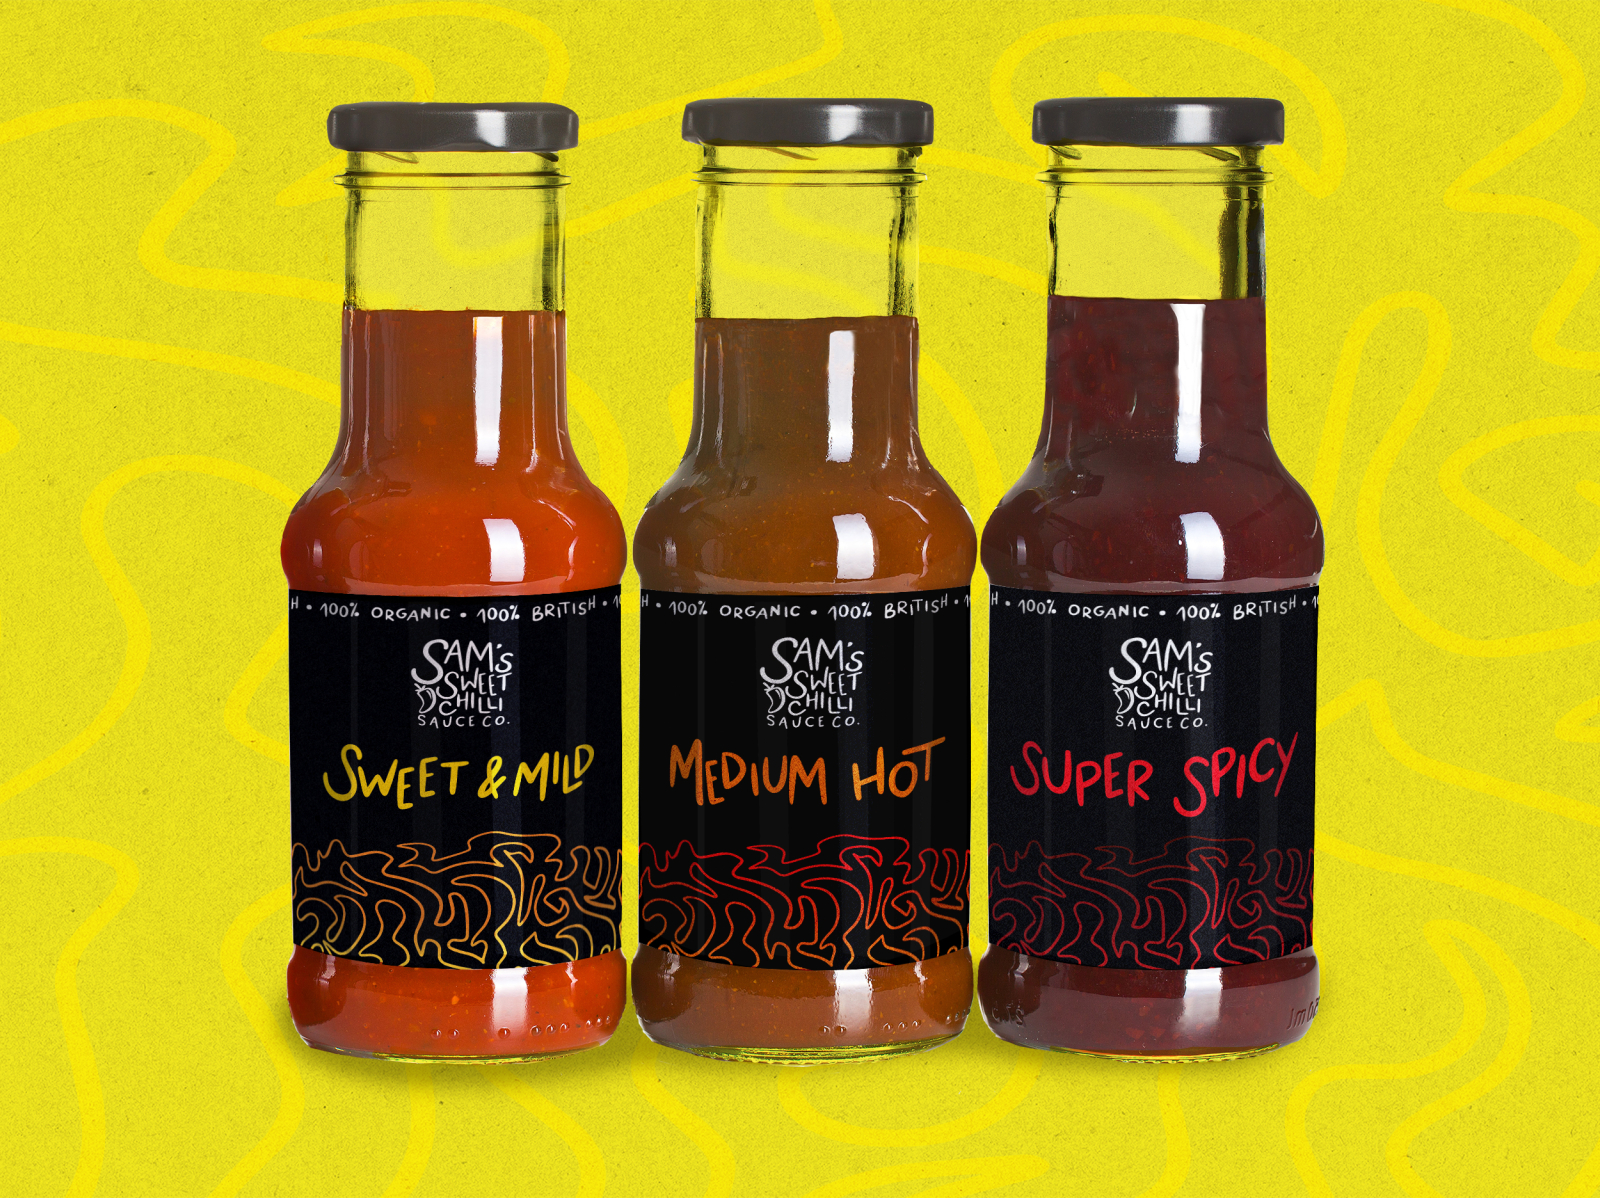 Hot sauce logo and label design by Brandi on Dribbble